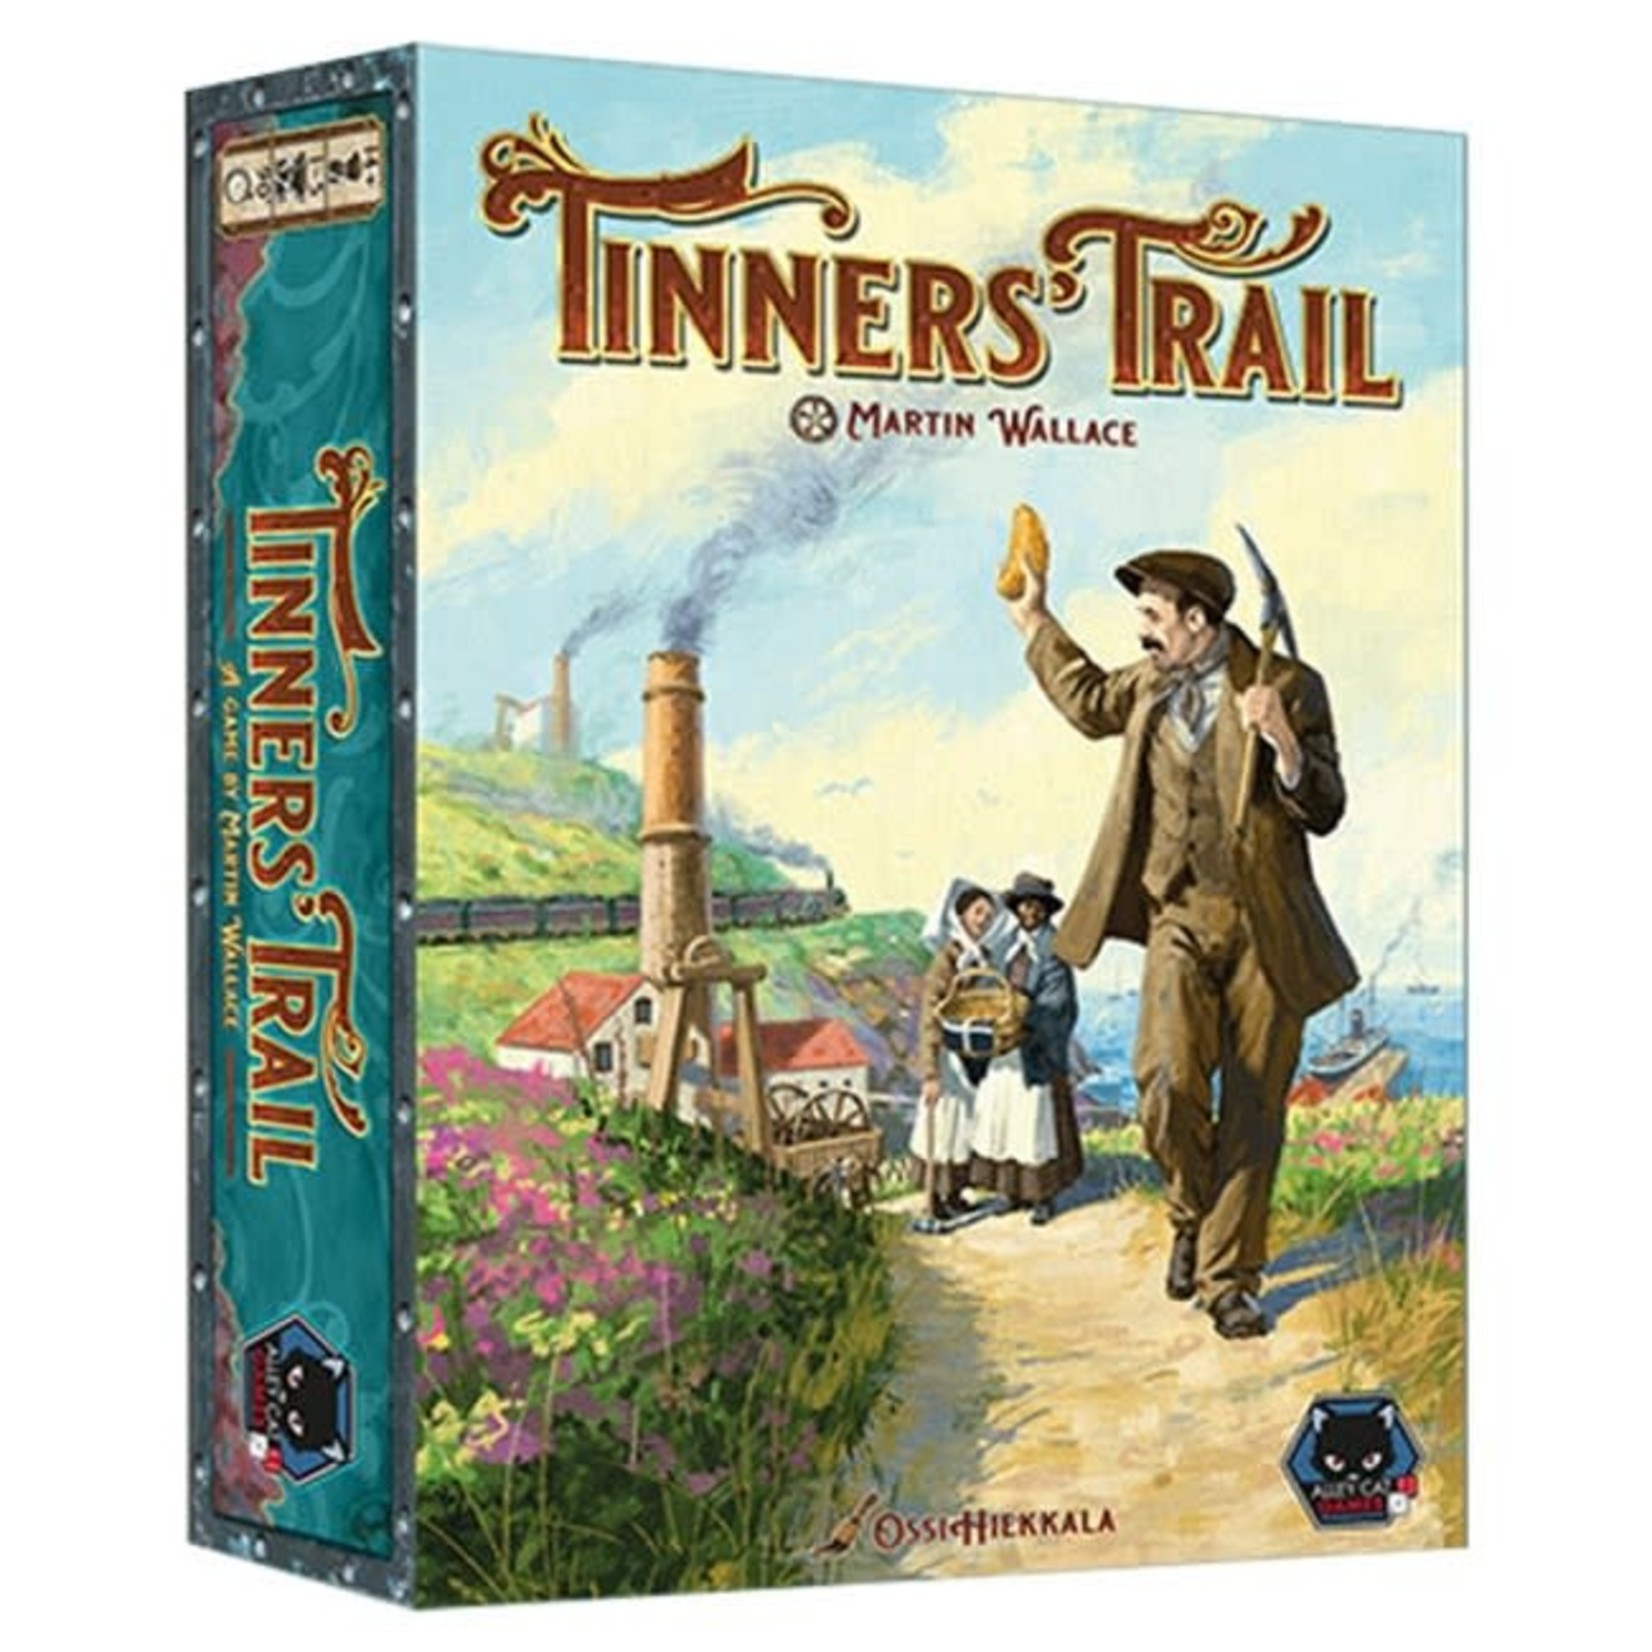 Alley Cat Games Tinner's Trail